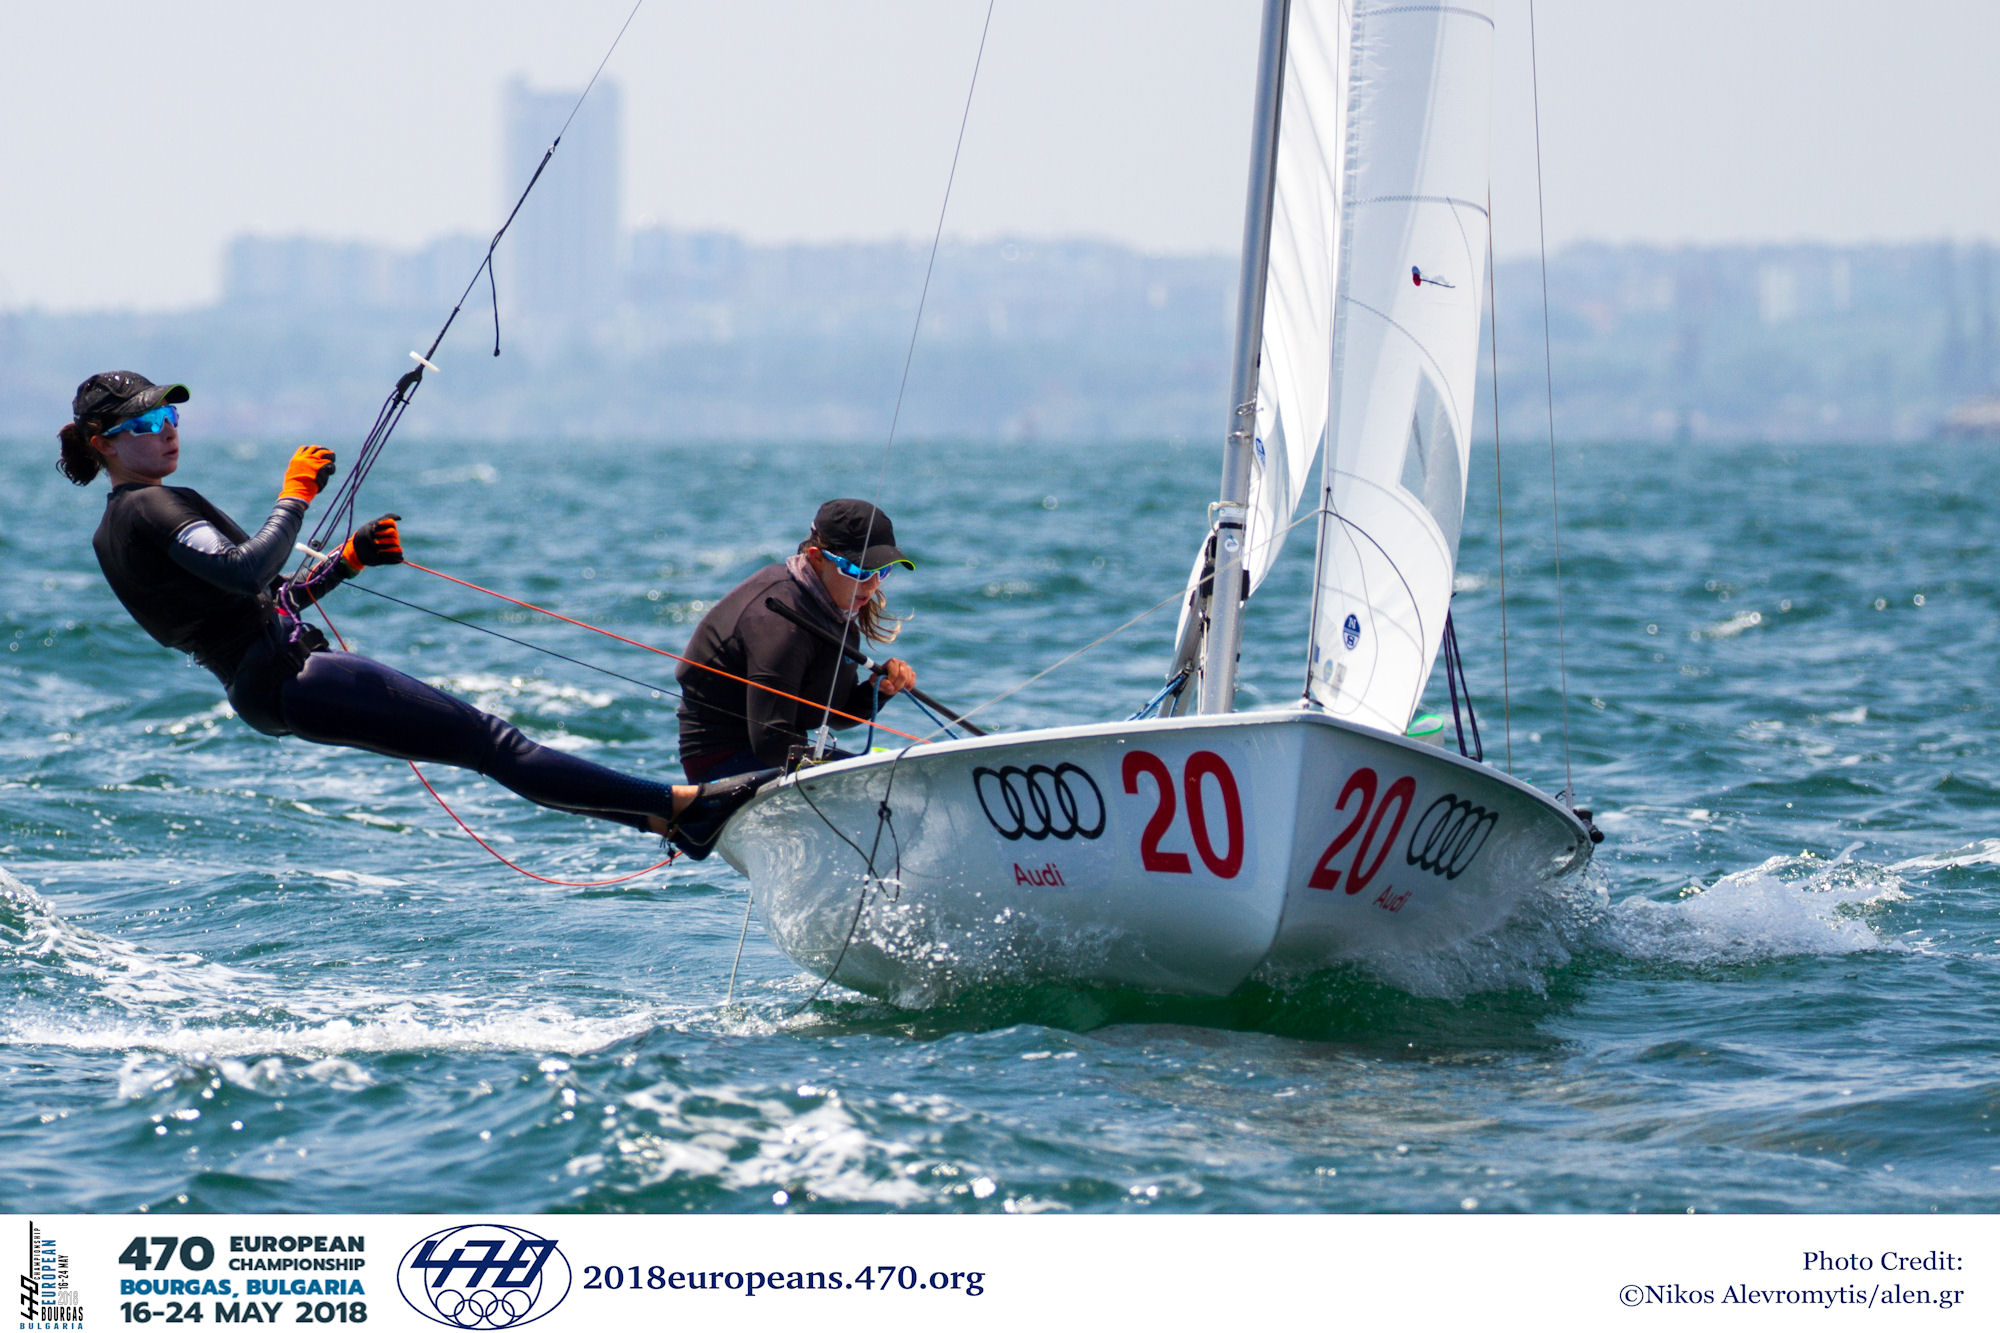 Gil Cohen/Noa Lasry (ISR) on top in the 470 Women after 3 races